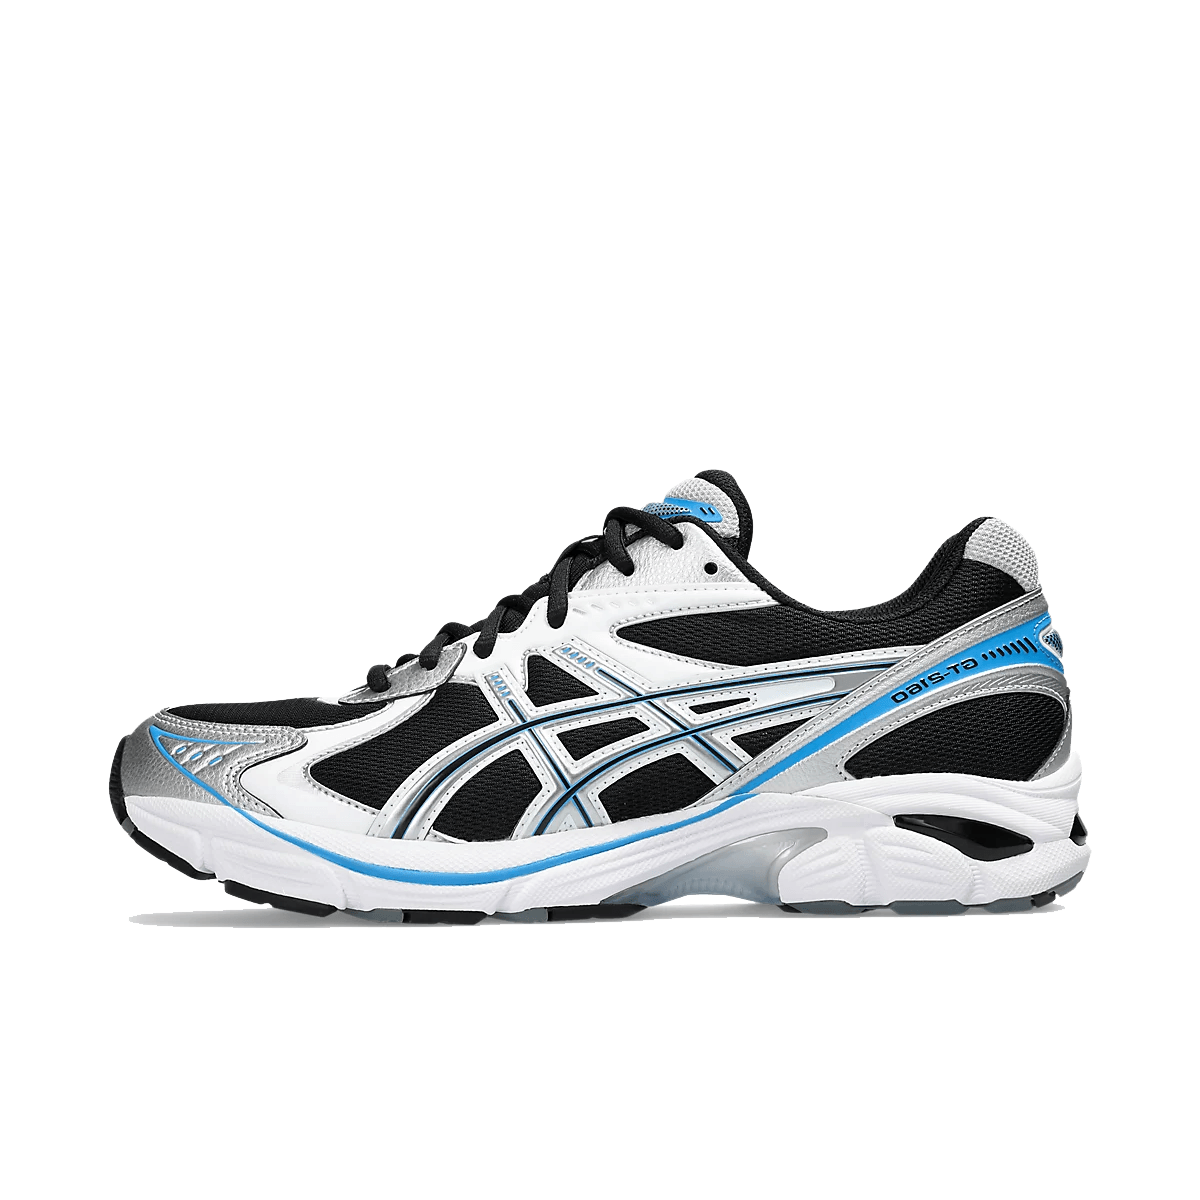 Asics GT-2160 'Pure Silver Blue' 1203A320-004